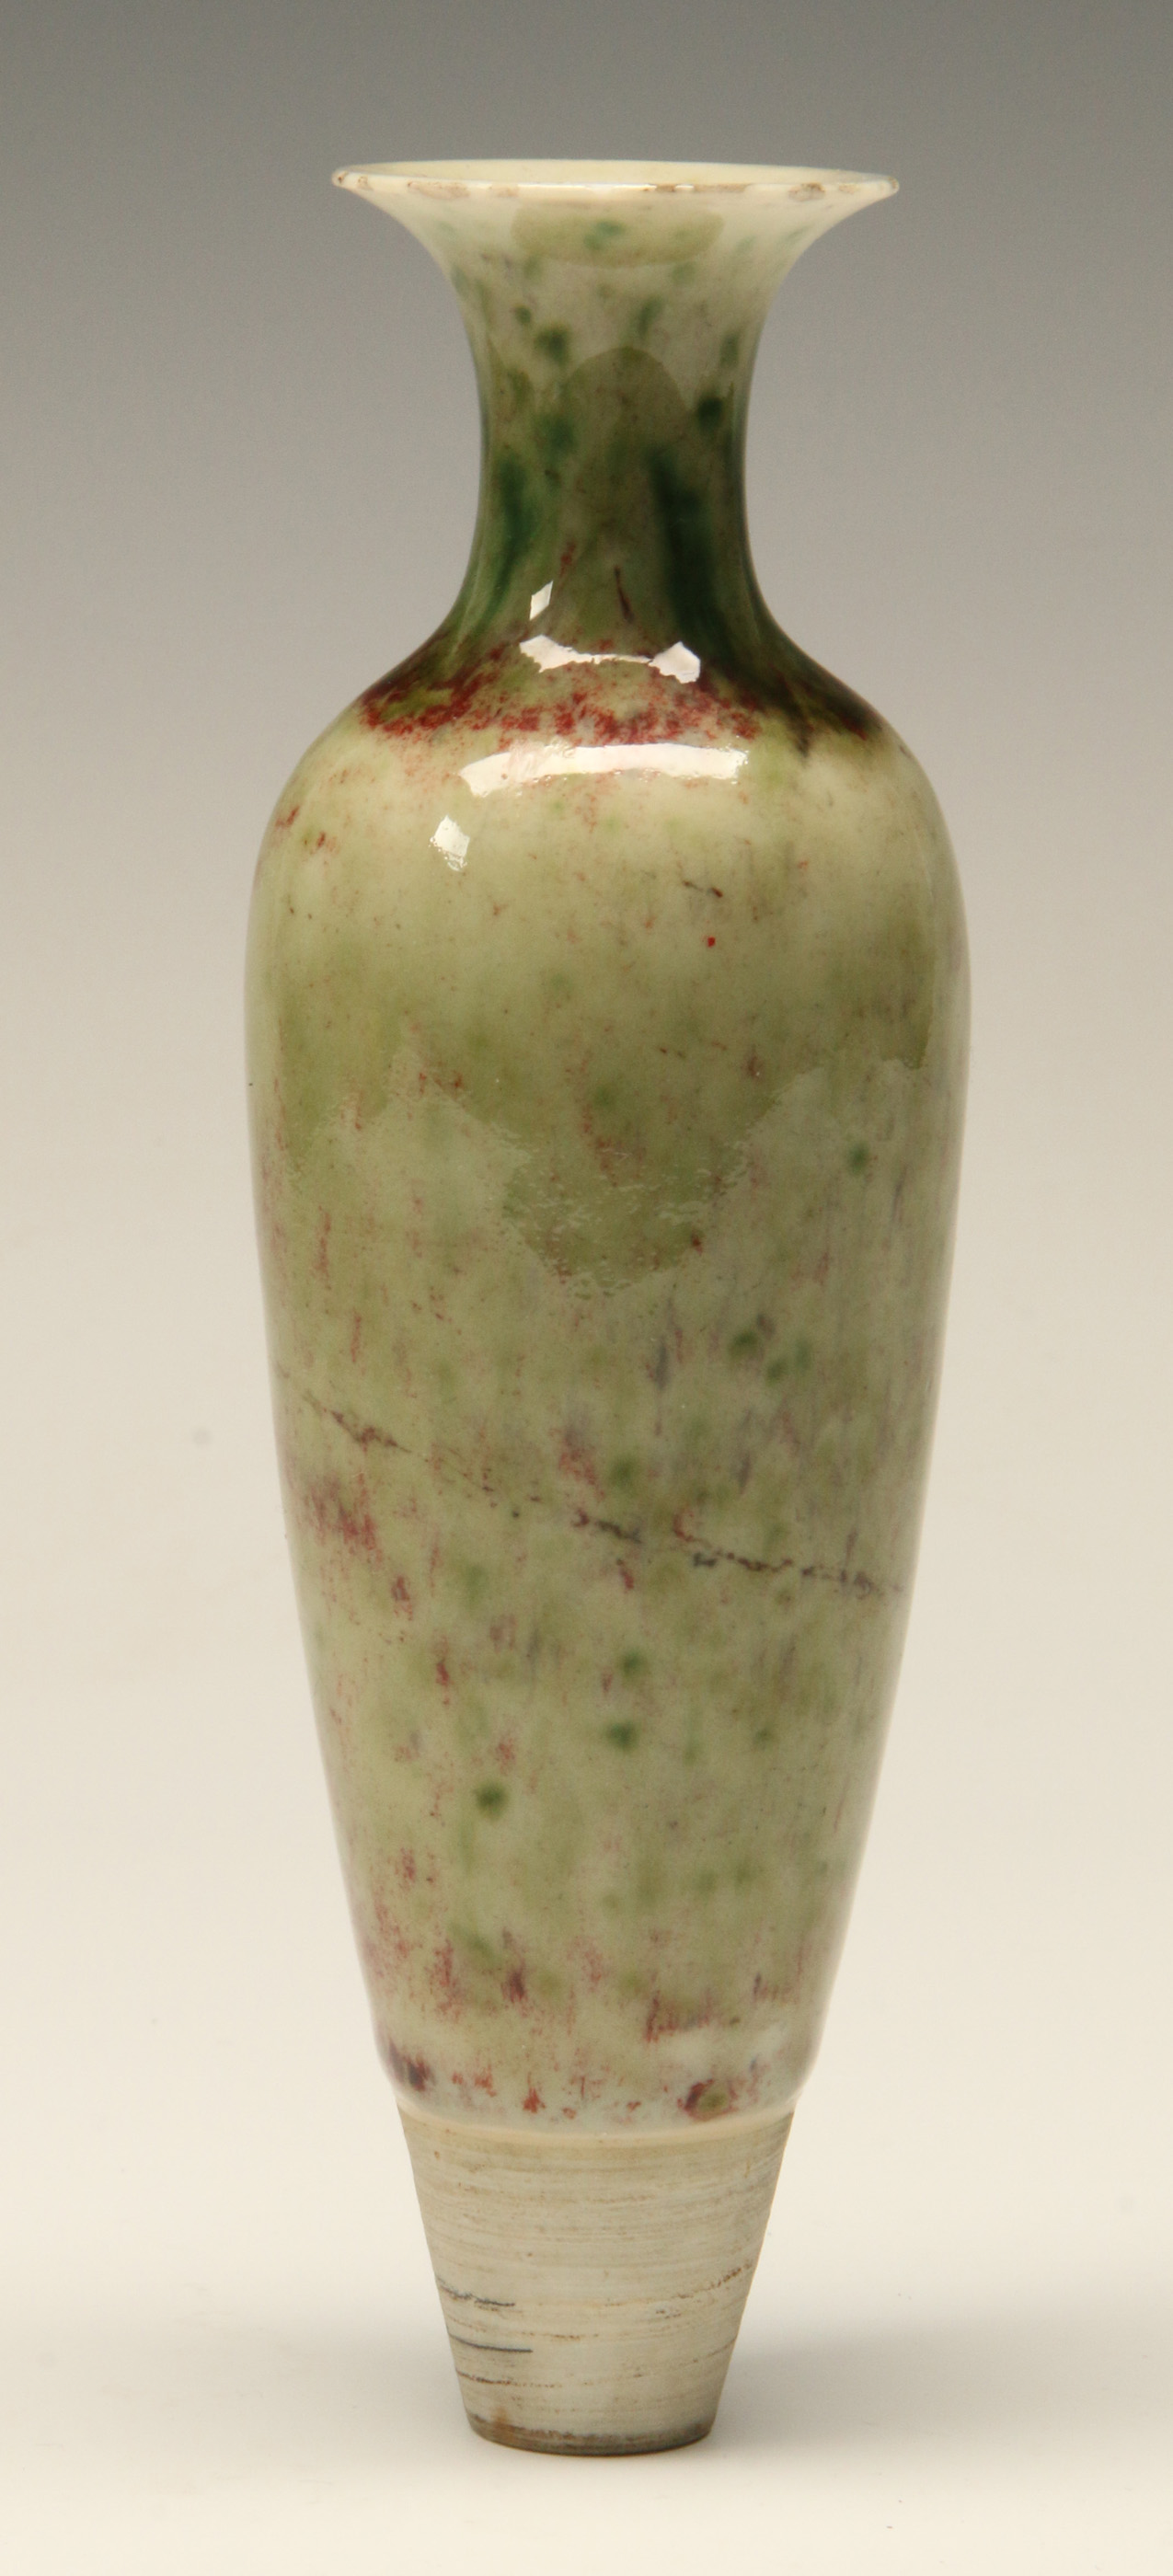 A SMALL ANTIQUE CHINESE AMPHORA FORM VASE